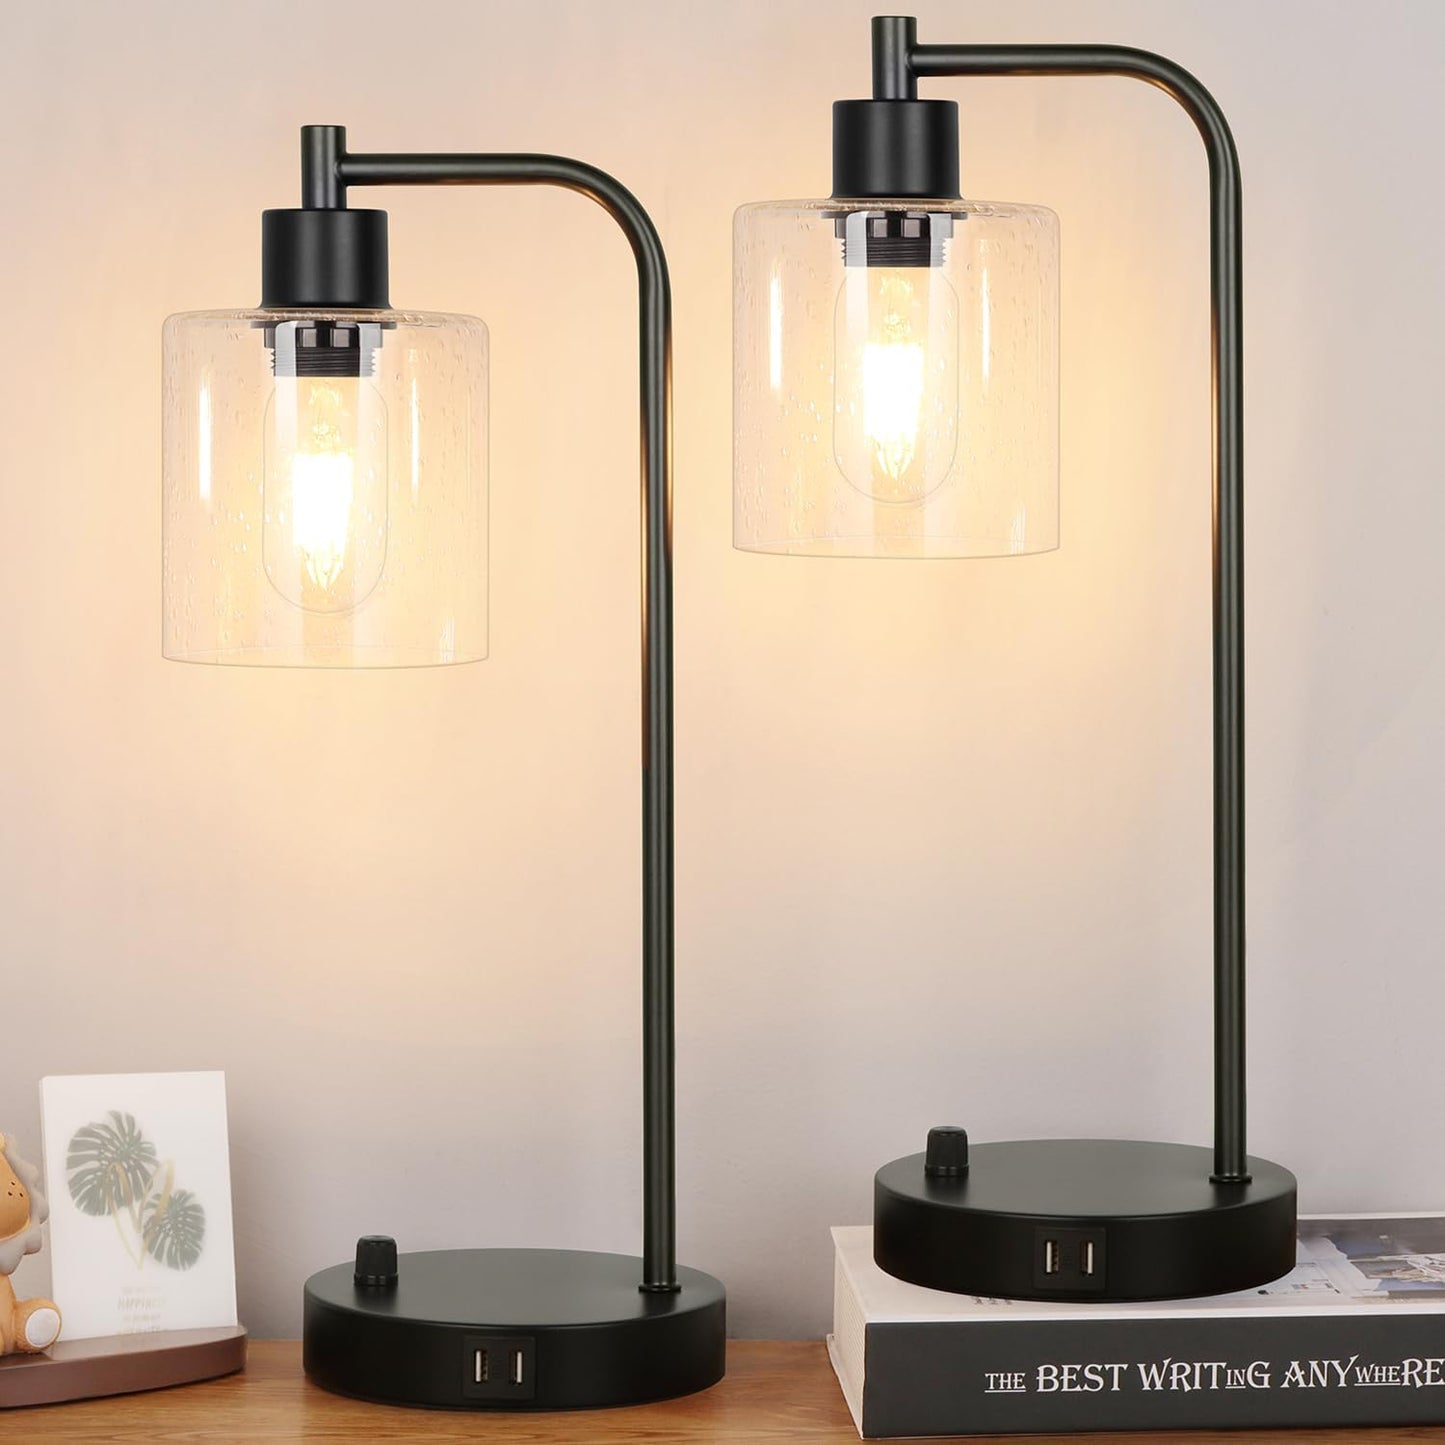 Set of 2 Industrial Table Lamps with 2 USB Port, Fully Stepless Dimmable Lamps 2 LED Bulb Included